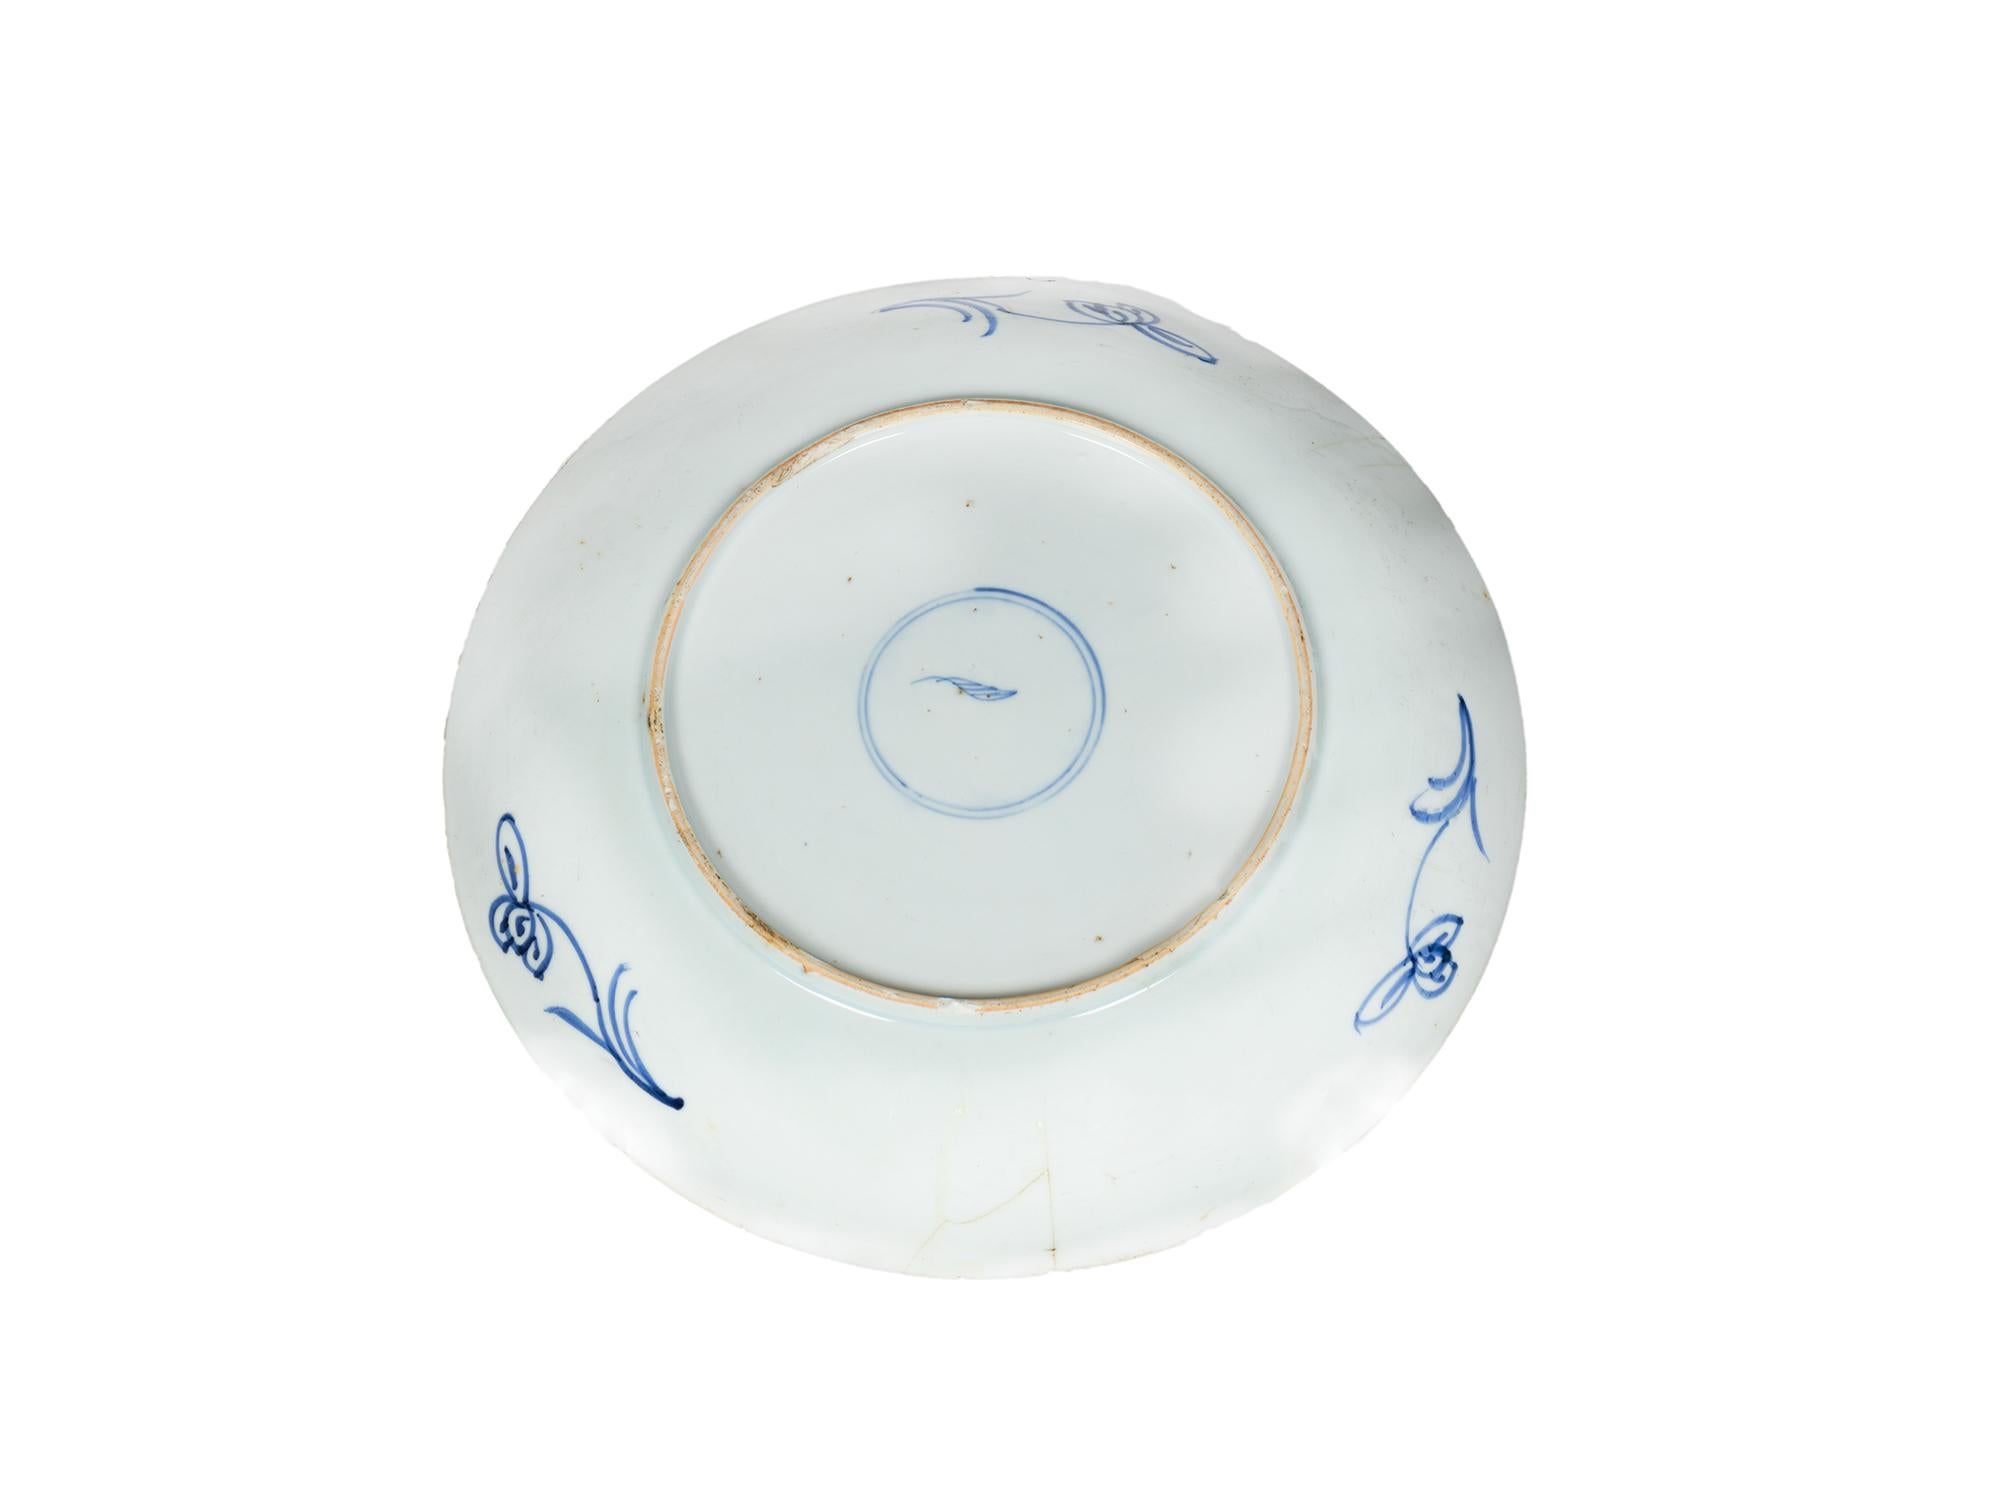 A huge, rare, and authentic Chinese Kangxi porcelain plate or shallow dish from the early Kangxi period of the 17th century, hand-decorated with flowers on the underside of the rim and hand-painted in Canton blue and white with the Aster flower